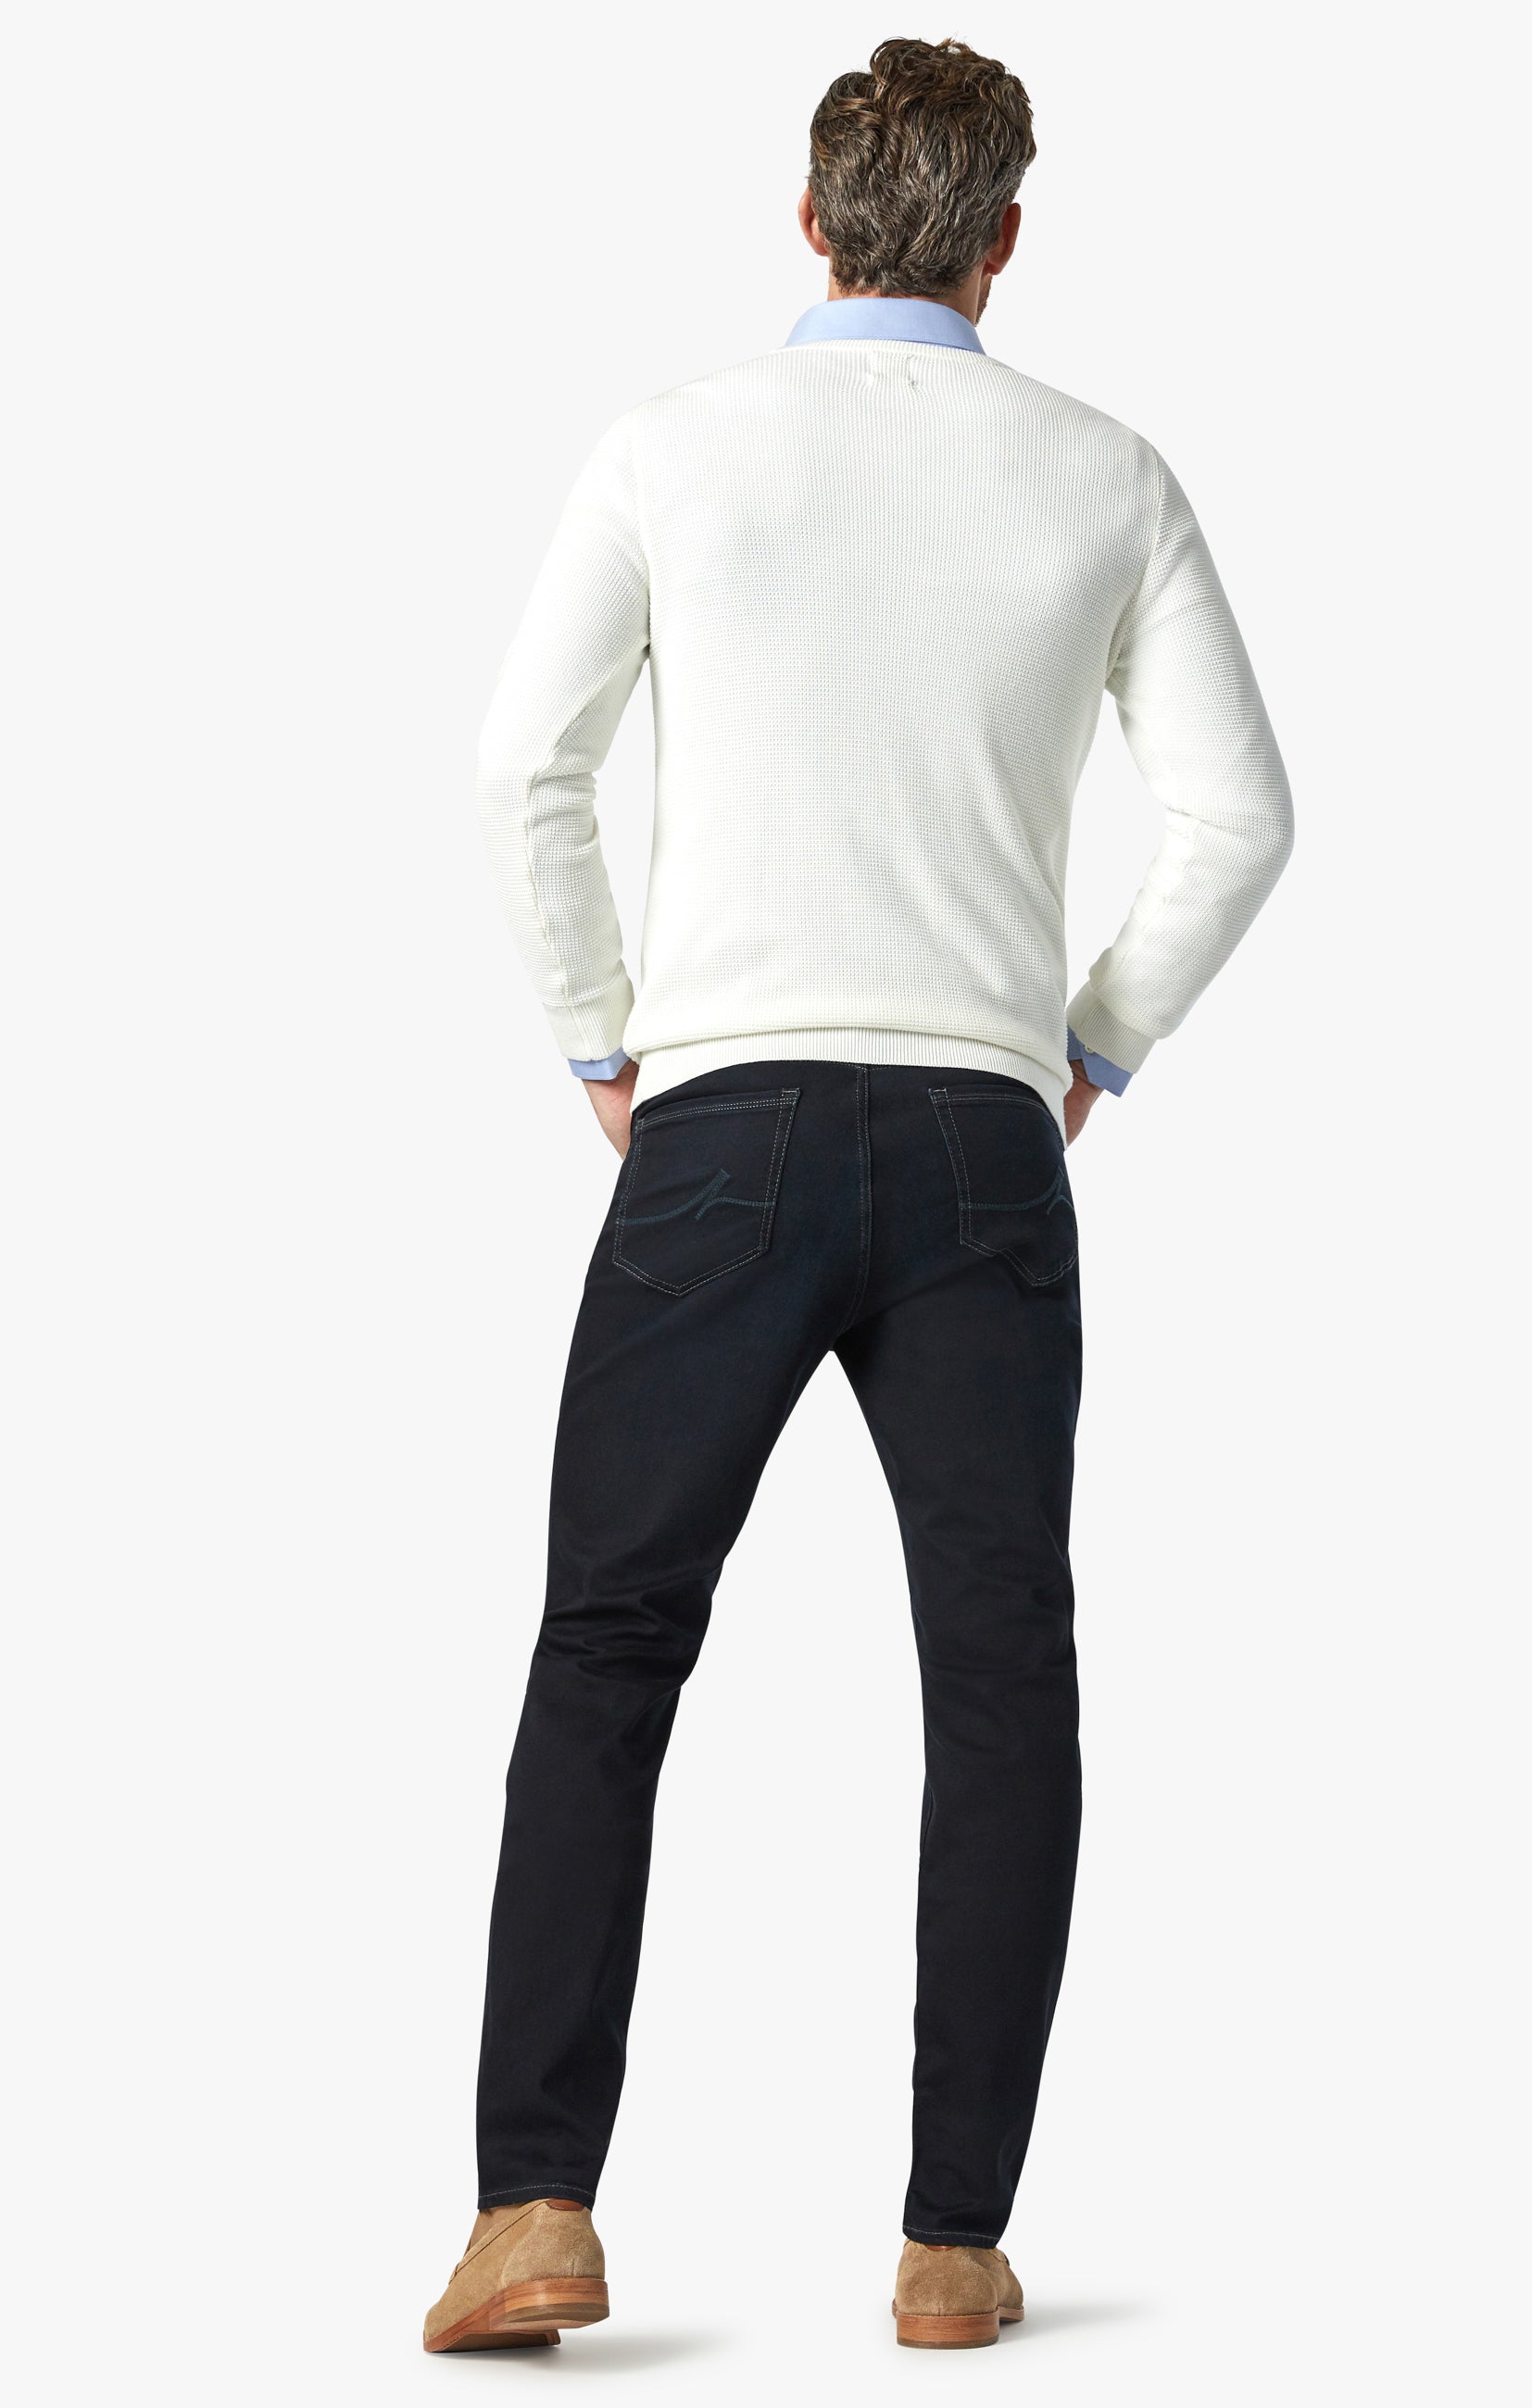 Champ Athletic Fit Jeans in Midnight Austin Image 4